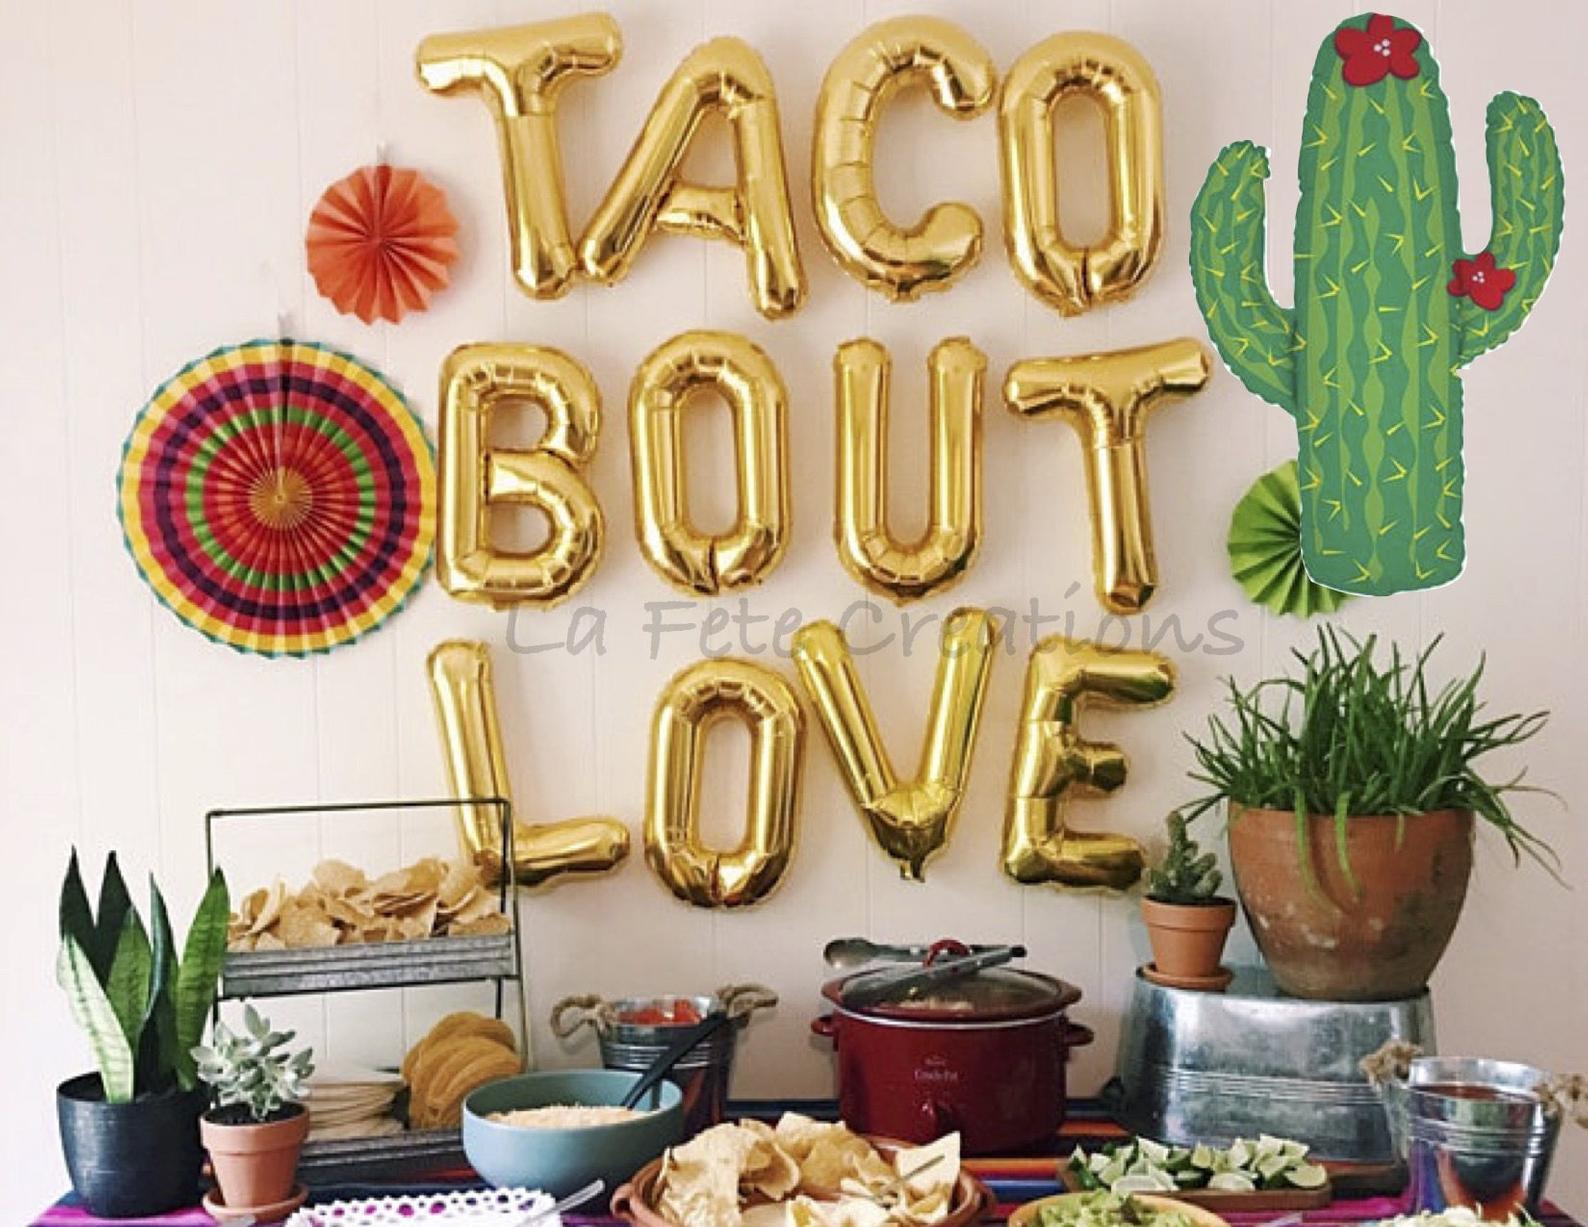 Let's Taco Bout Love gold balloons wall decor for a fiesta themed bridal shower // Get inspired with these Elegant Mexican Fiesta / Cinco de Mayo Themed Bridal Shower Ideas. // mysweetengagement.com